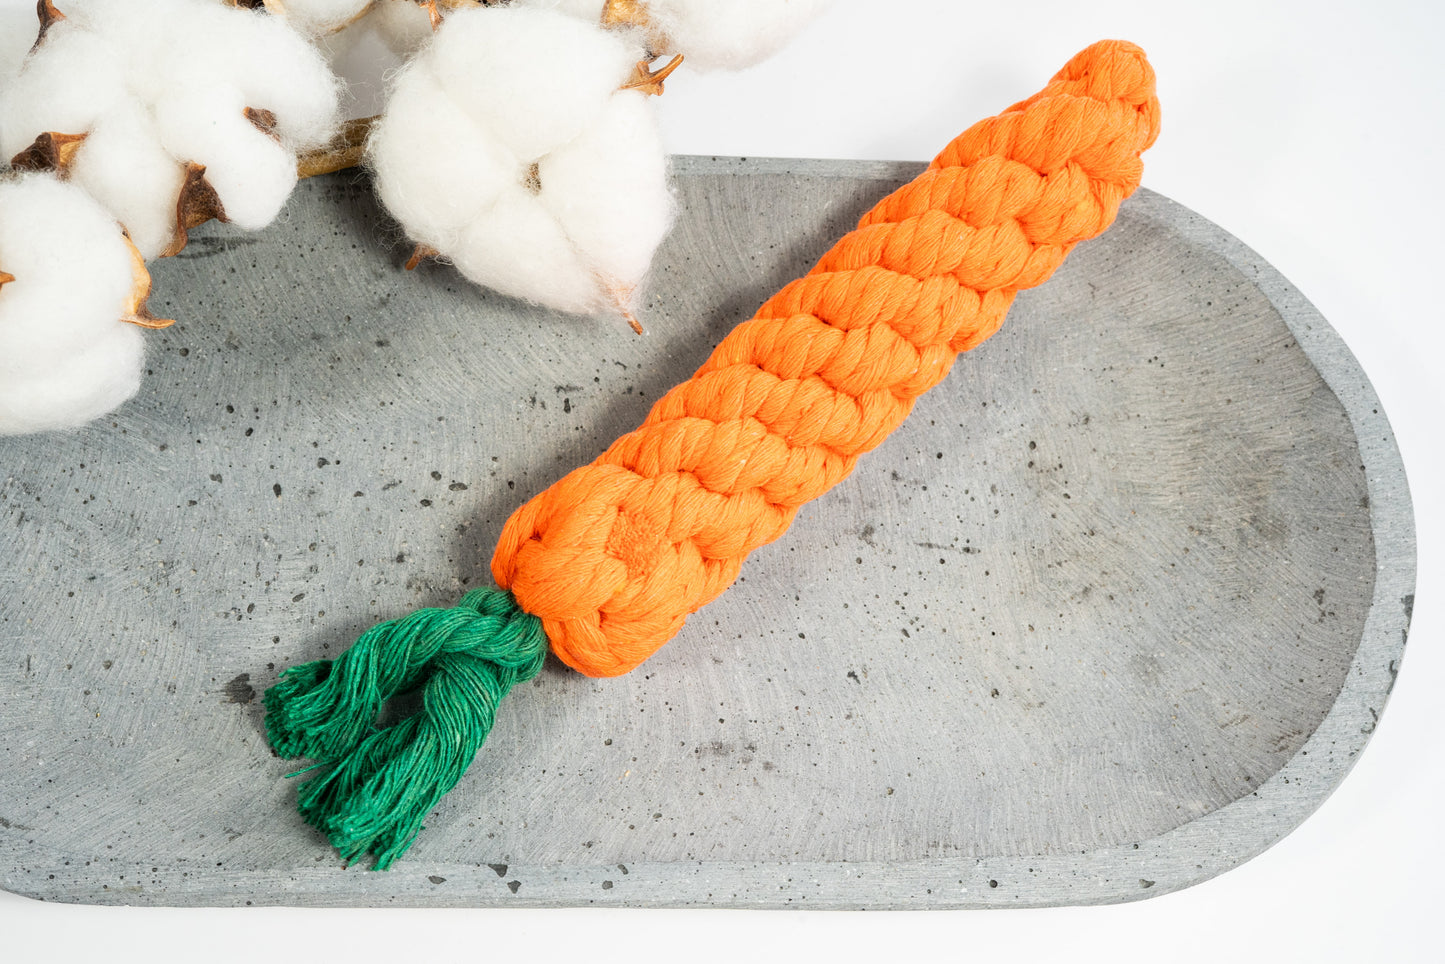 Carrot-shaped dog toy woven from strong and durable cotton rope.